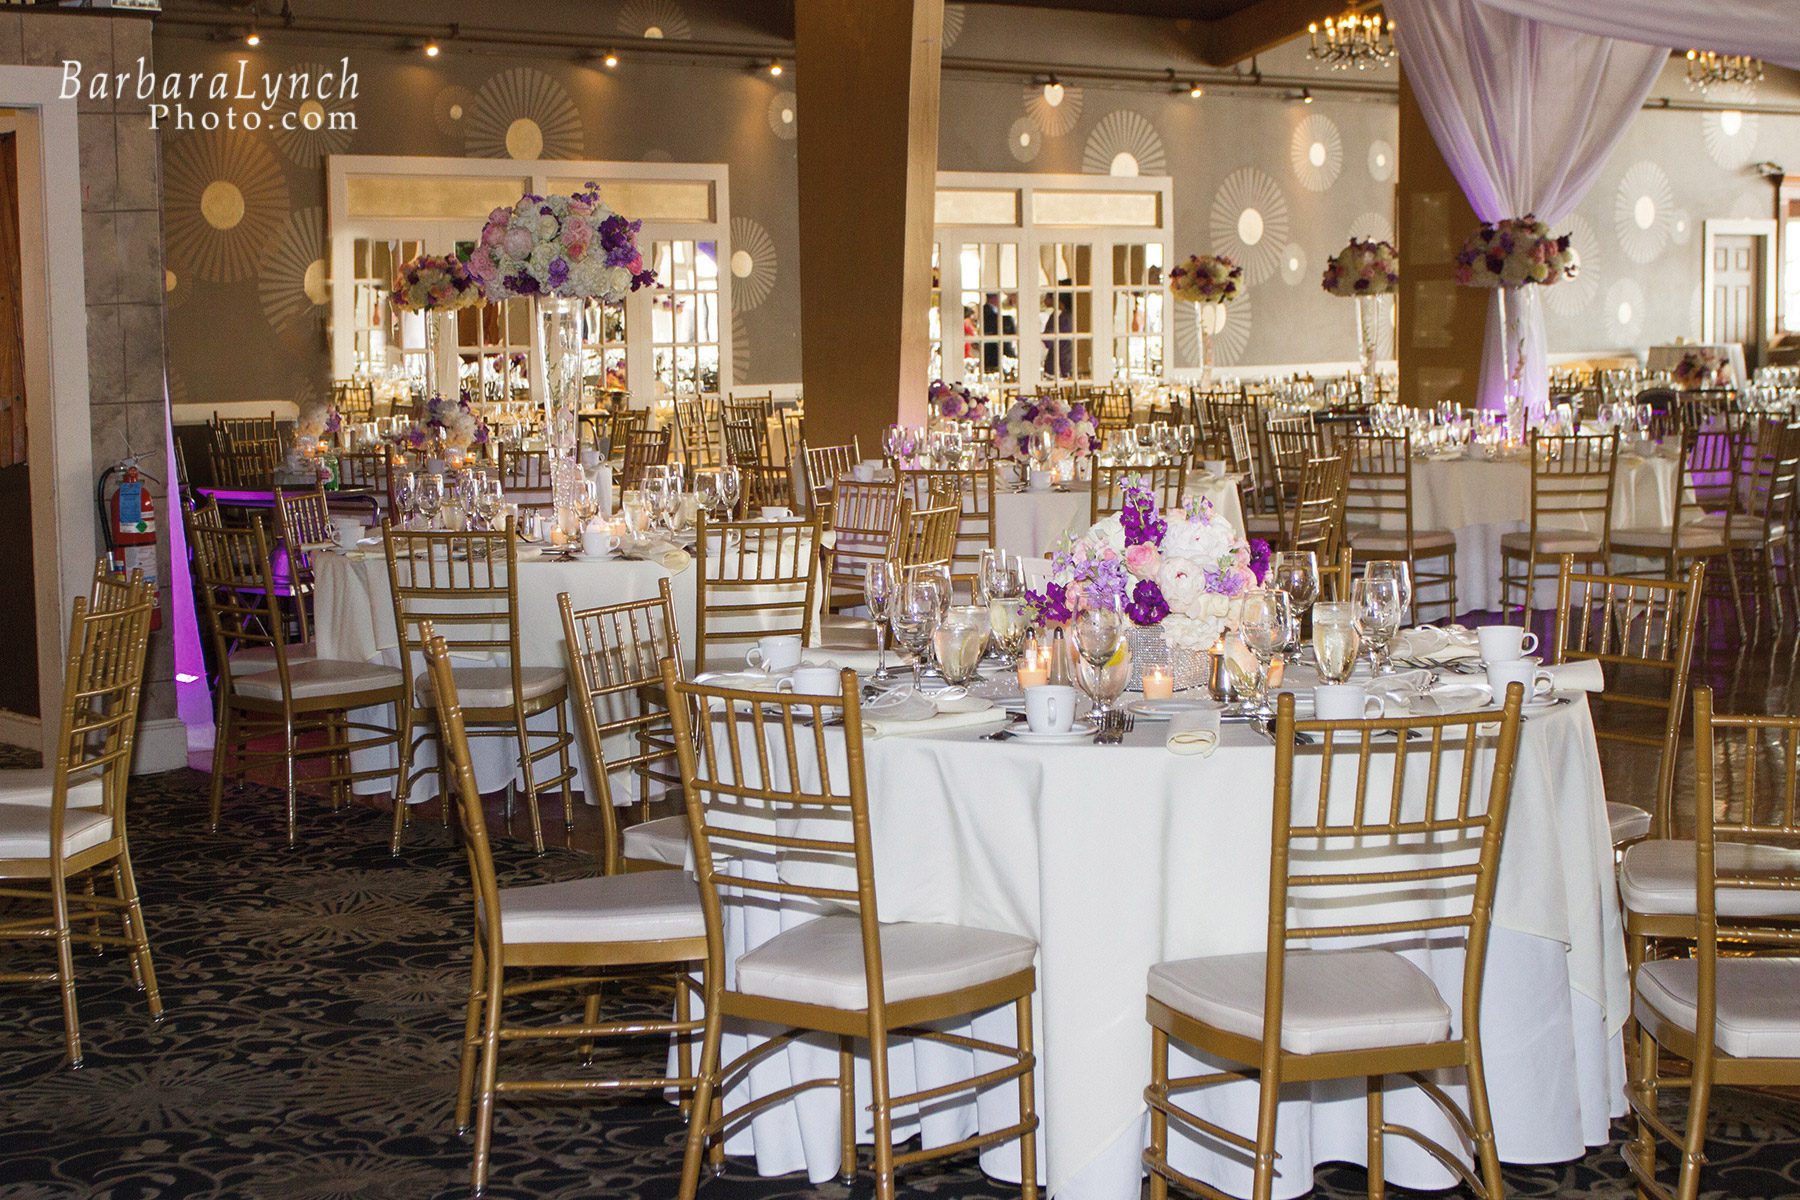 Harborview Ballroom place settings and decor